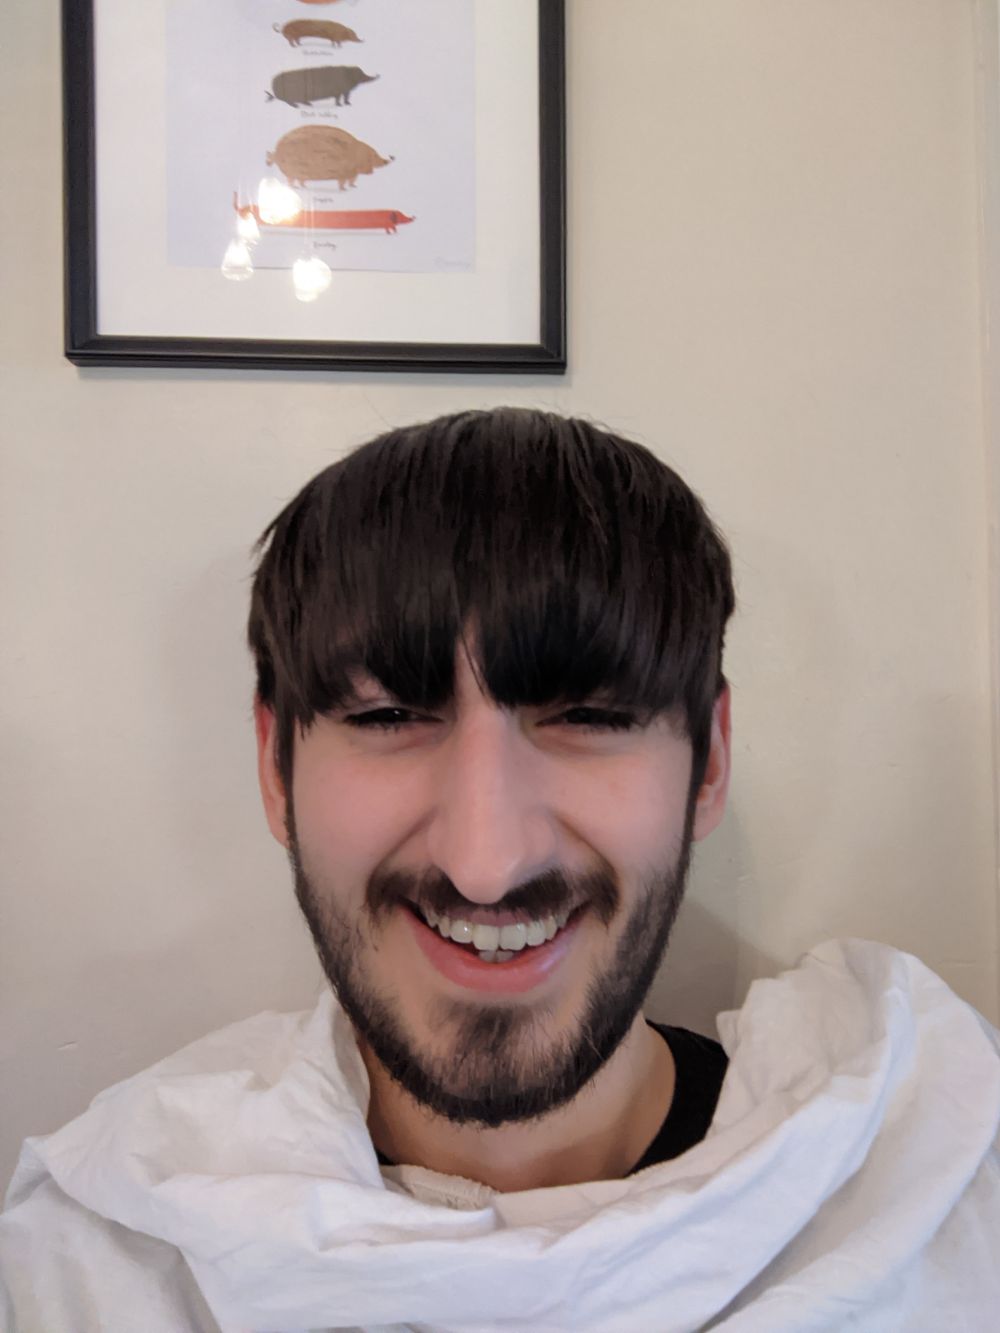 Selfie of Jamie before the haircut, with a white sheet around him to catch the falling hair, with a lot of beard and moustache growth, and hair slightly covering his eyes